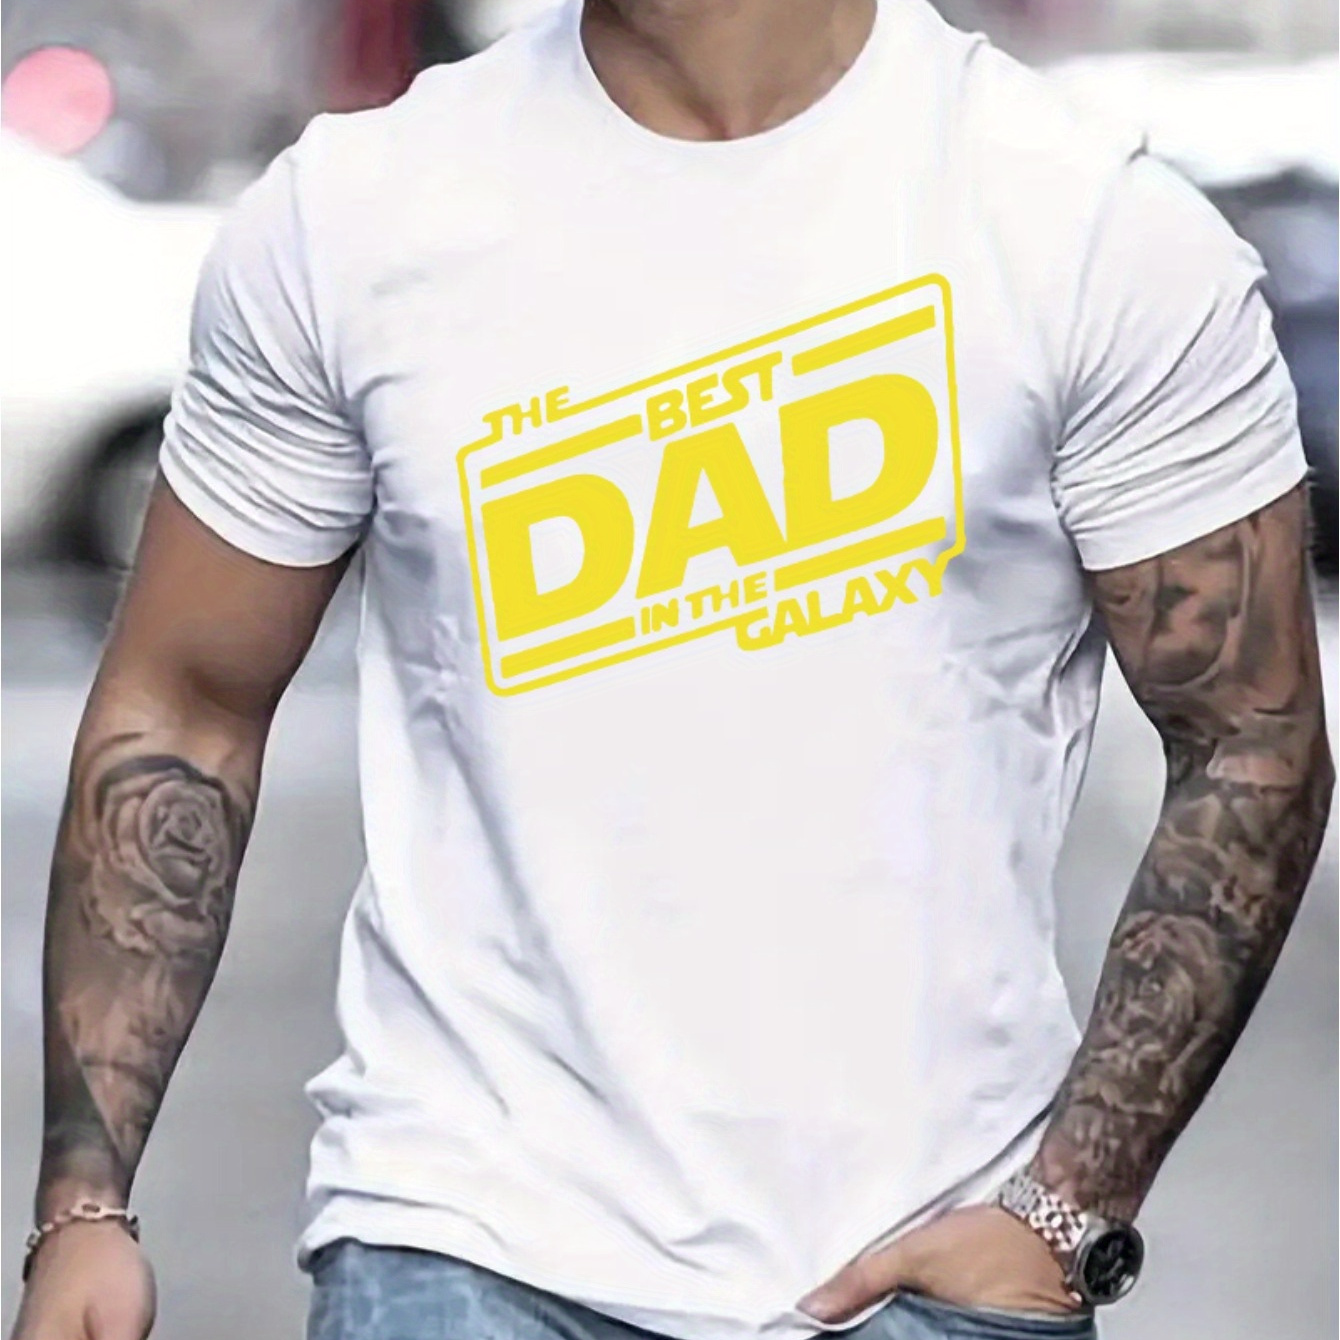 

The Best Dad In The Galaxy Print, Men's Novel Graphic Design T-shirt, Casual Comfy Tees For Summer, Men's Clothing Tops For Daily Activities